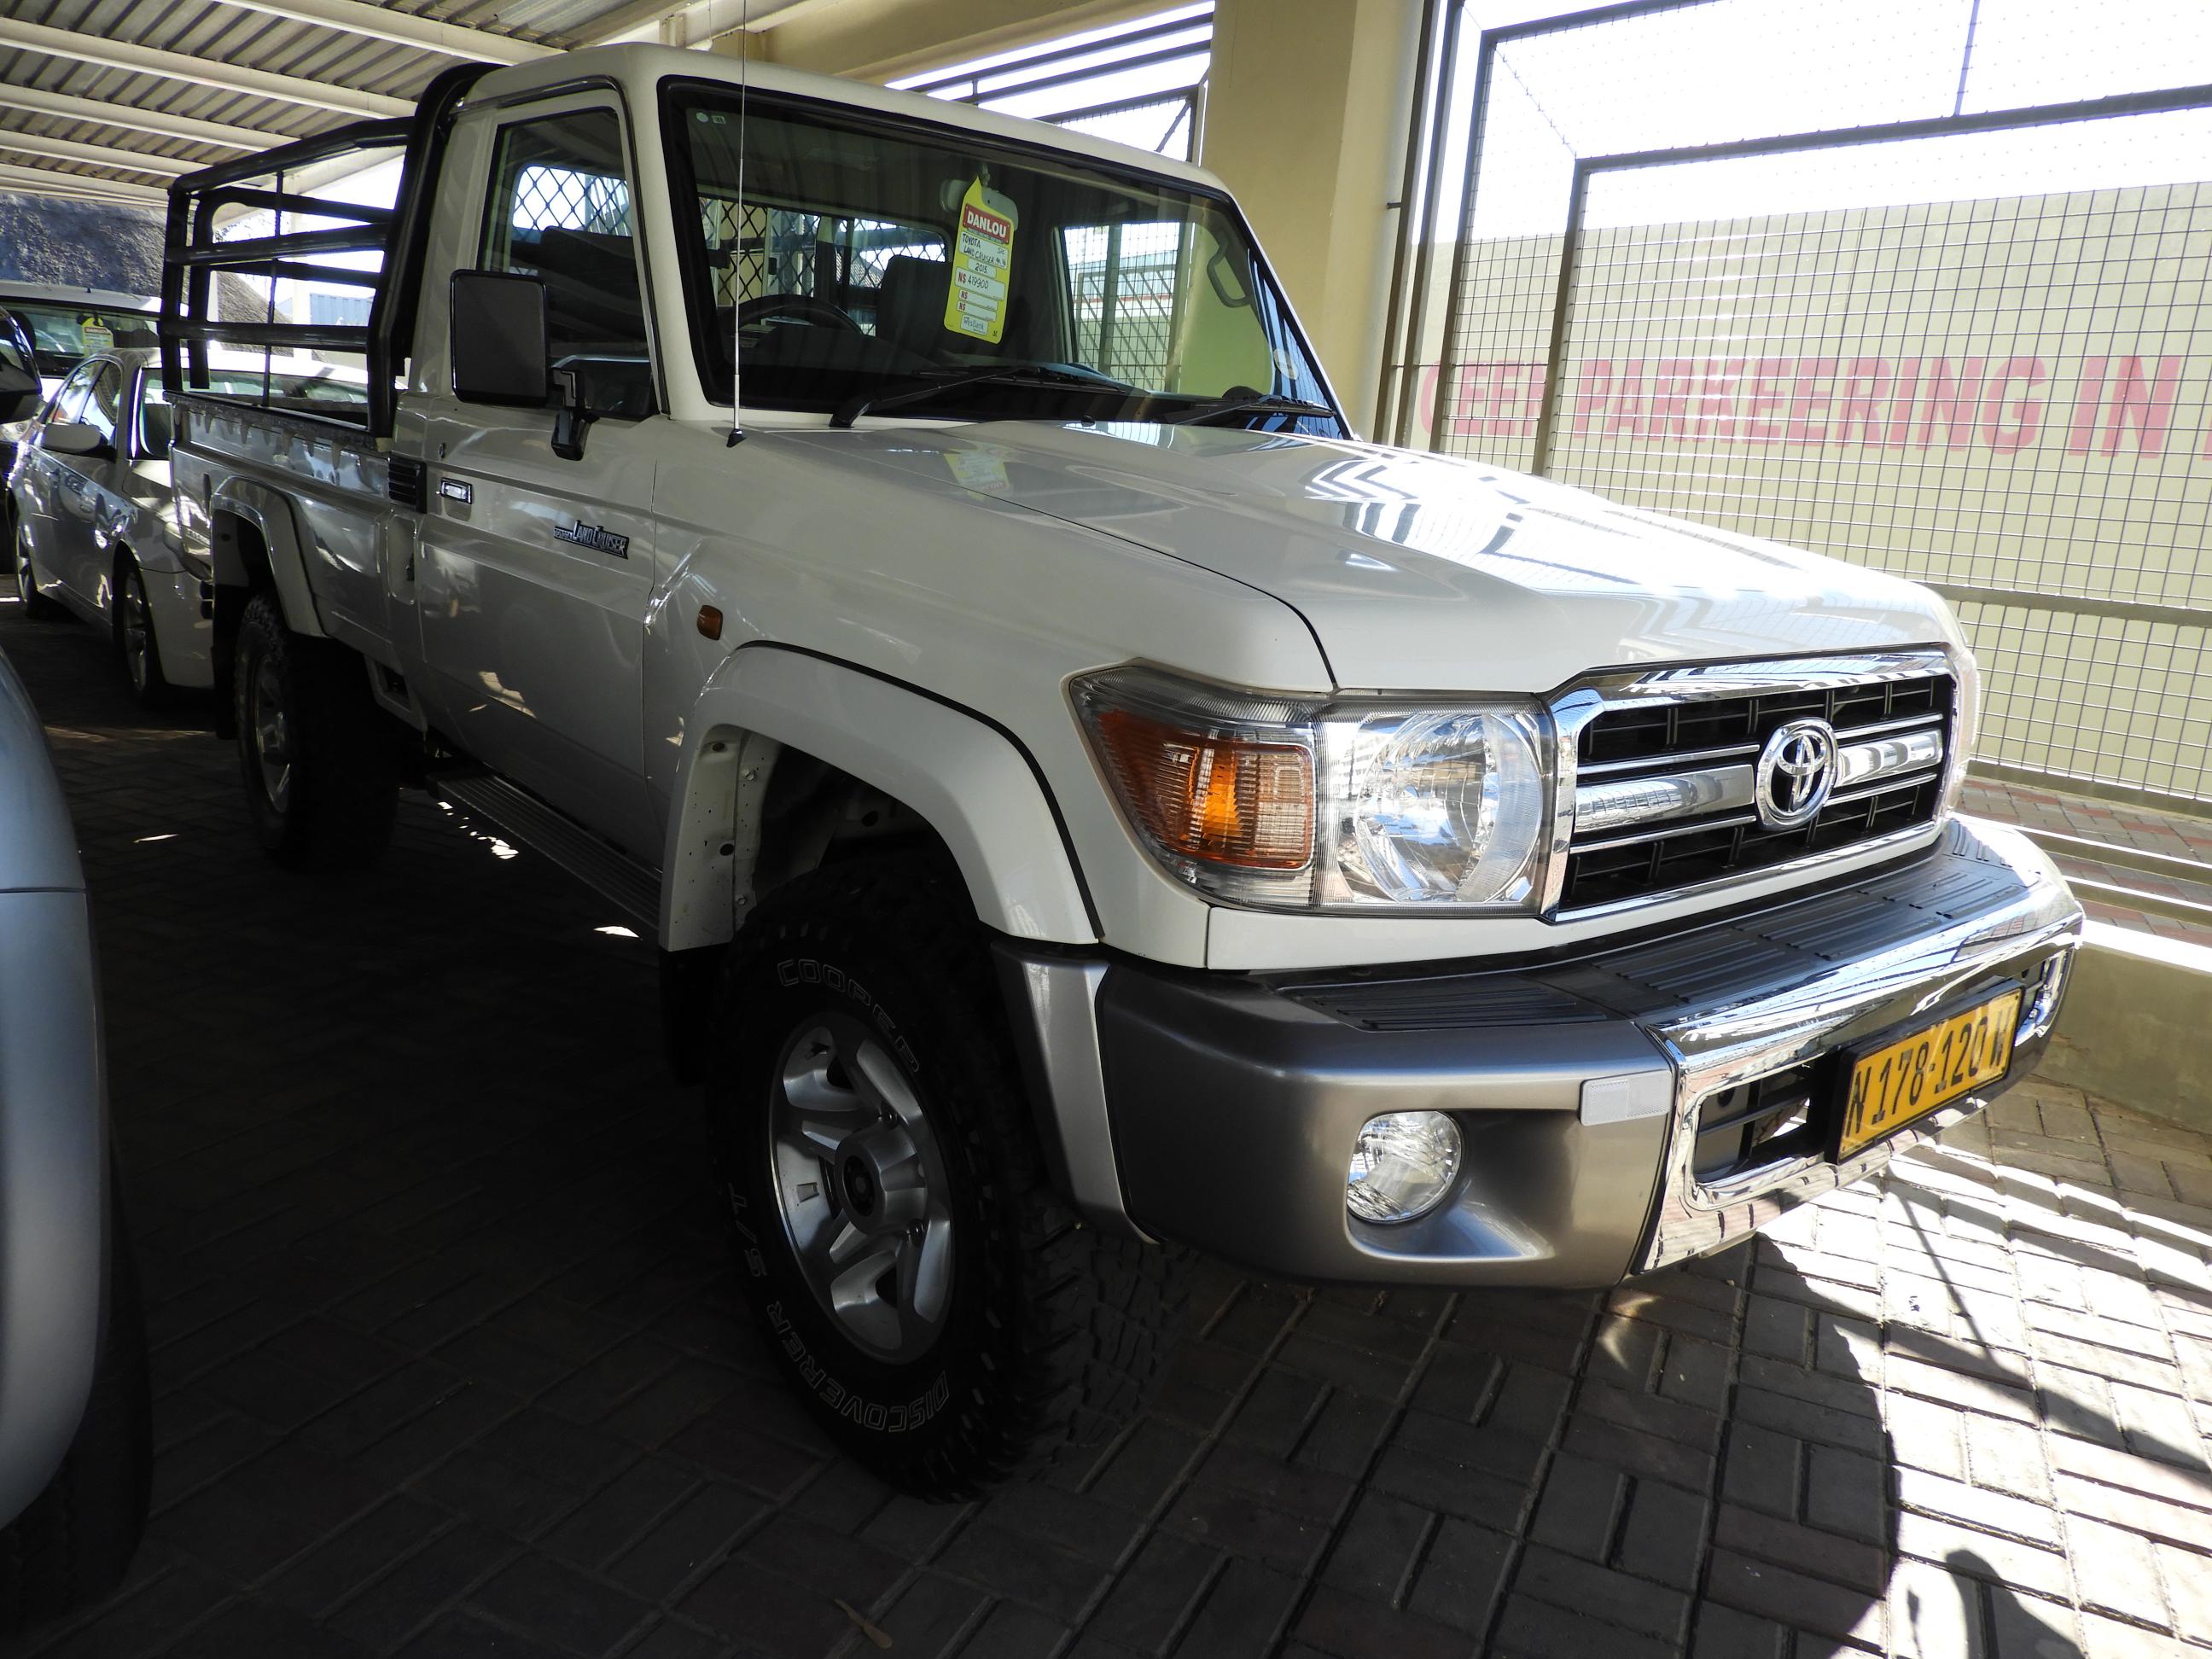 Buy Used Toyota Land Cruiser in Windhoek - Price for Used ...